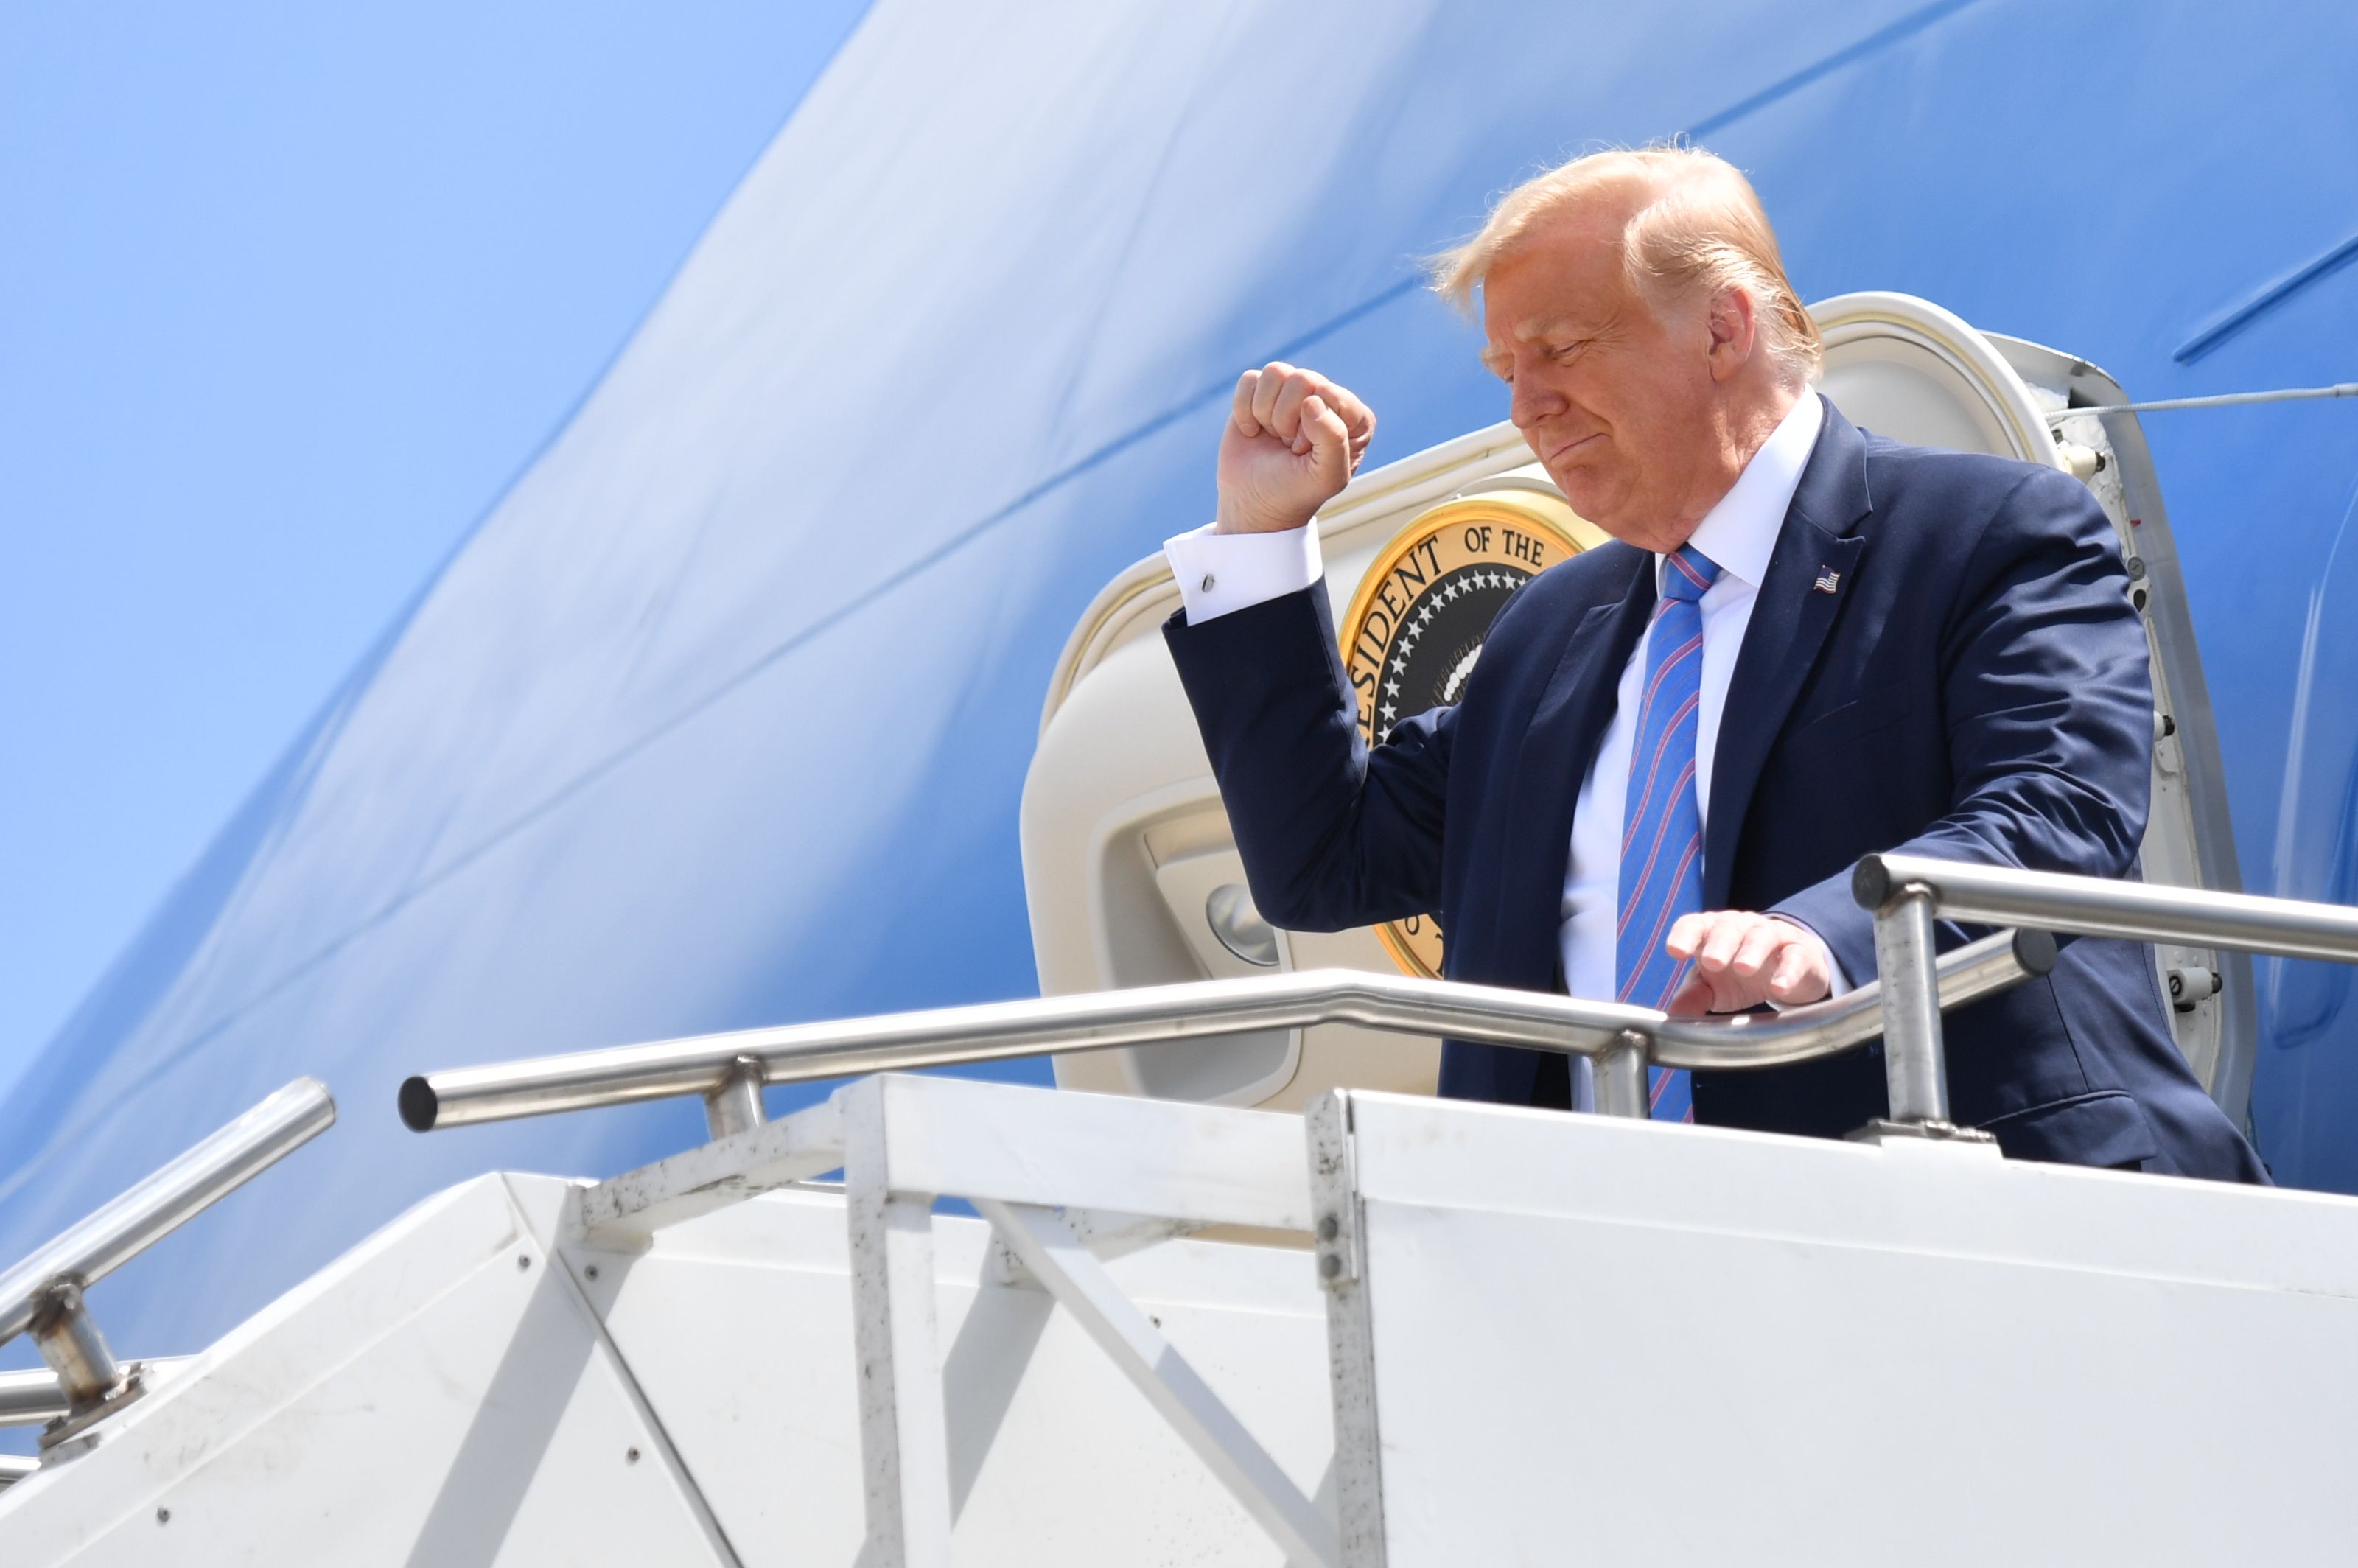 US President Donald Trump gestures as he walks off Air Force One on July 29, 2020 upon arrival at Midland Airport in Midland, Texas. (Photo by NICHOLAS KAMM/AFP via Getty Images)